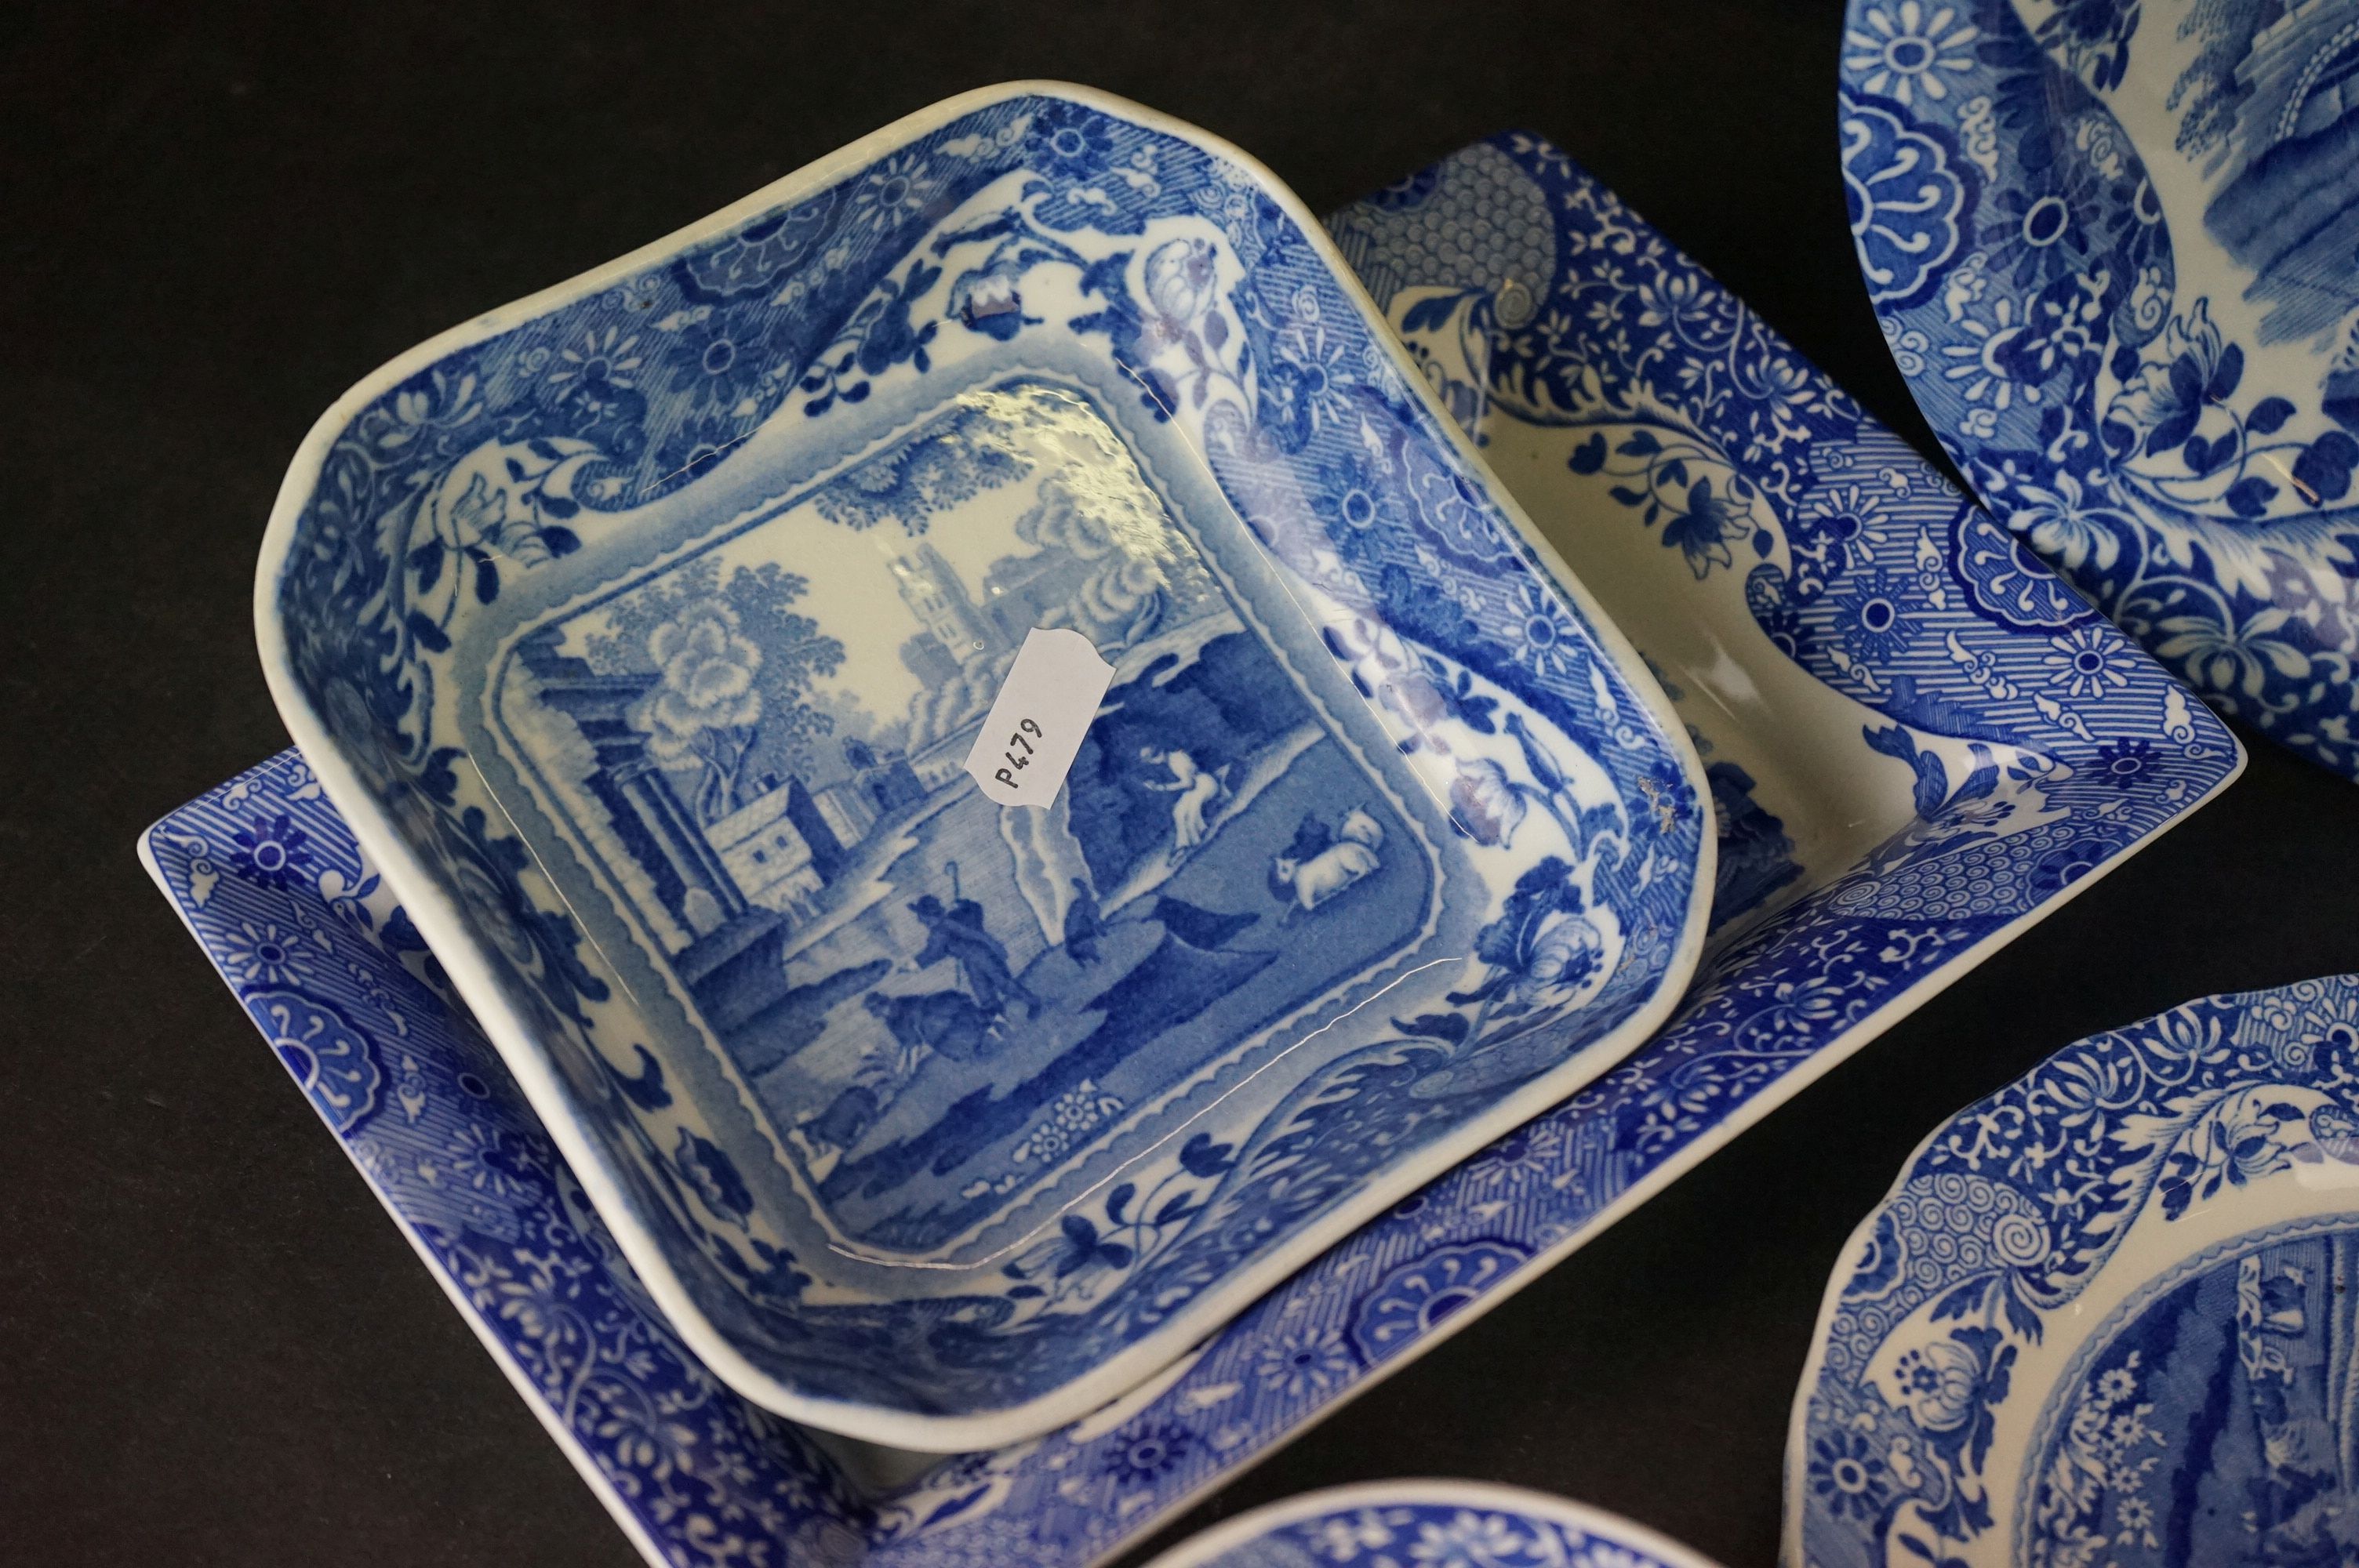 Collection of Spode Italian Blue and Ceramics including Bowl, Two Cups and Saucers, Two Tea Plates - Image 6 of 9